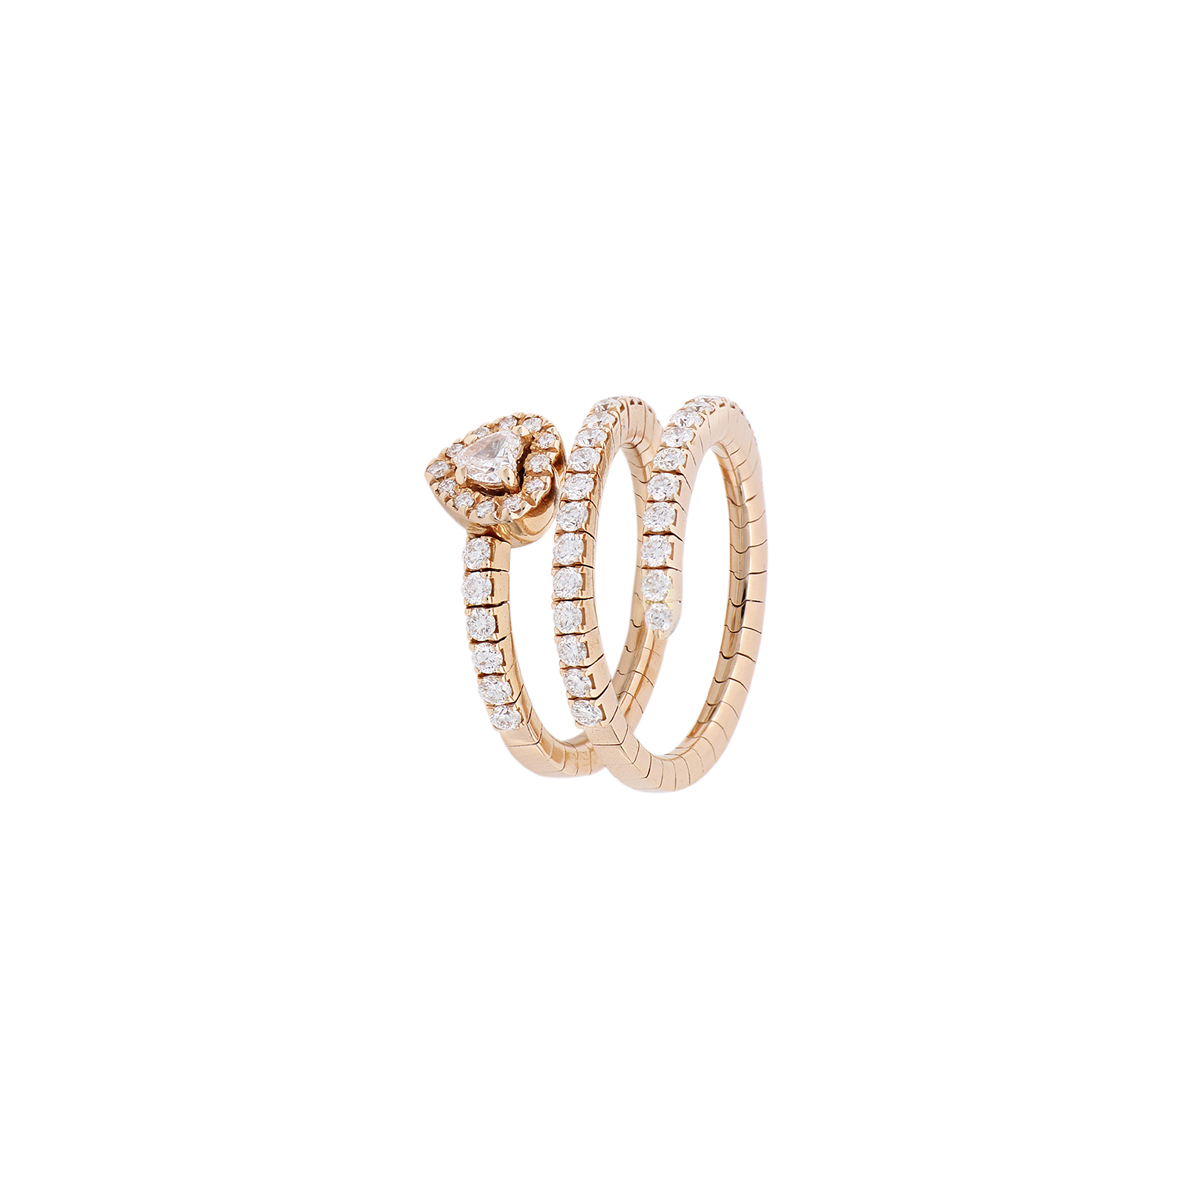 Red Gold Spiral Heart Ring